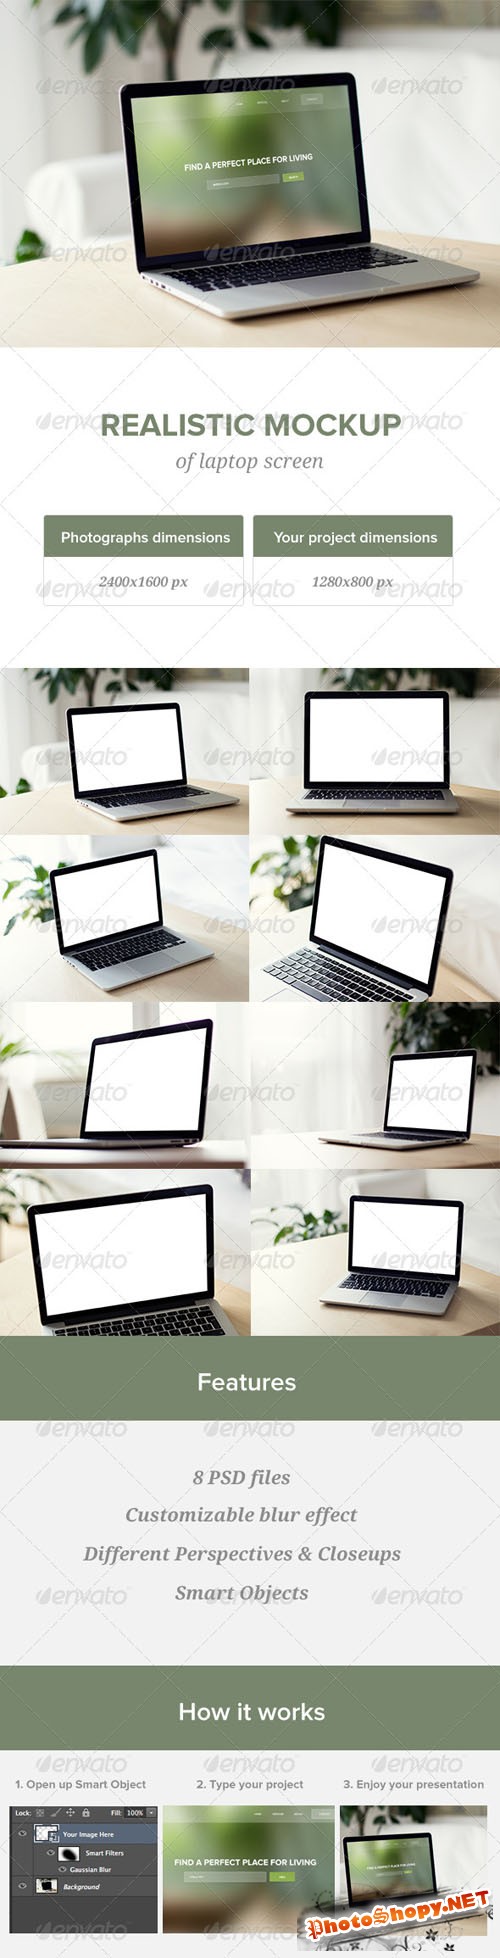 GraphicRiver - Realistic Laptop Screen Mockup - 8 PSD files 7501210